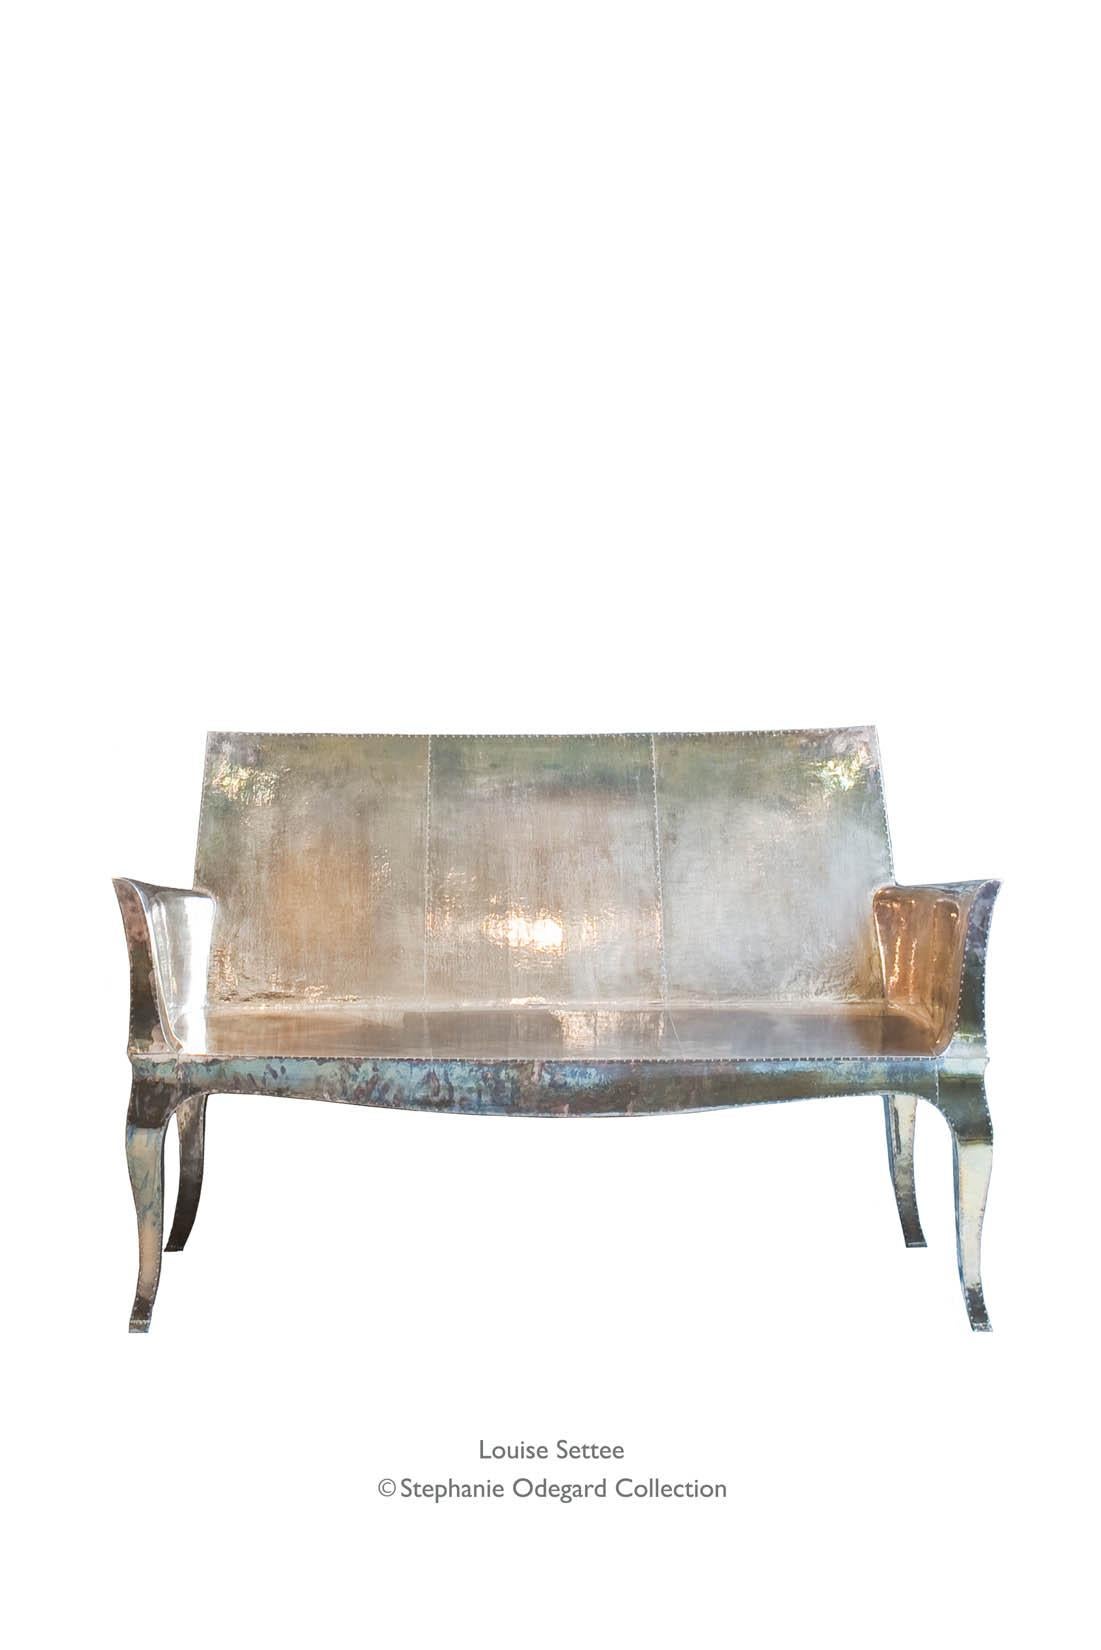 Louise Settee Art Deco Benches in Smooth Brass by Paul Mathieu for S Odegard For Sale 5